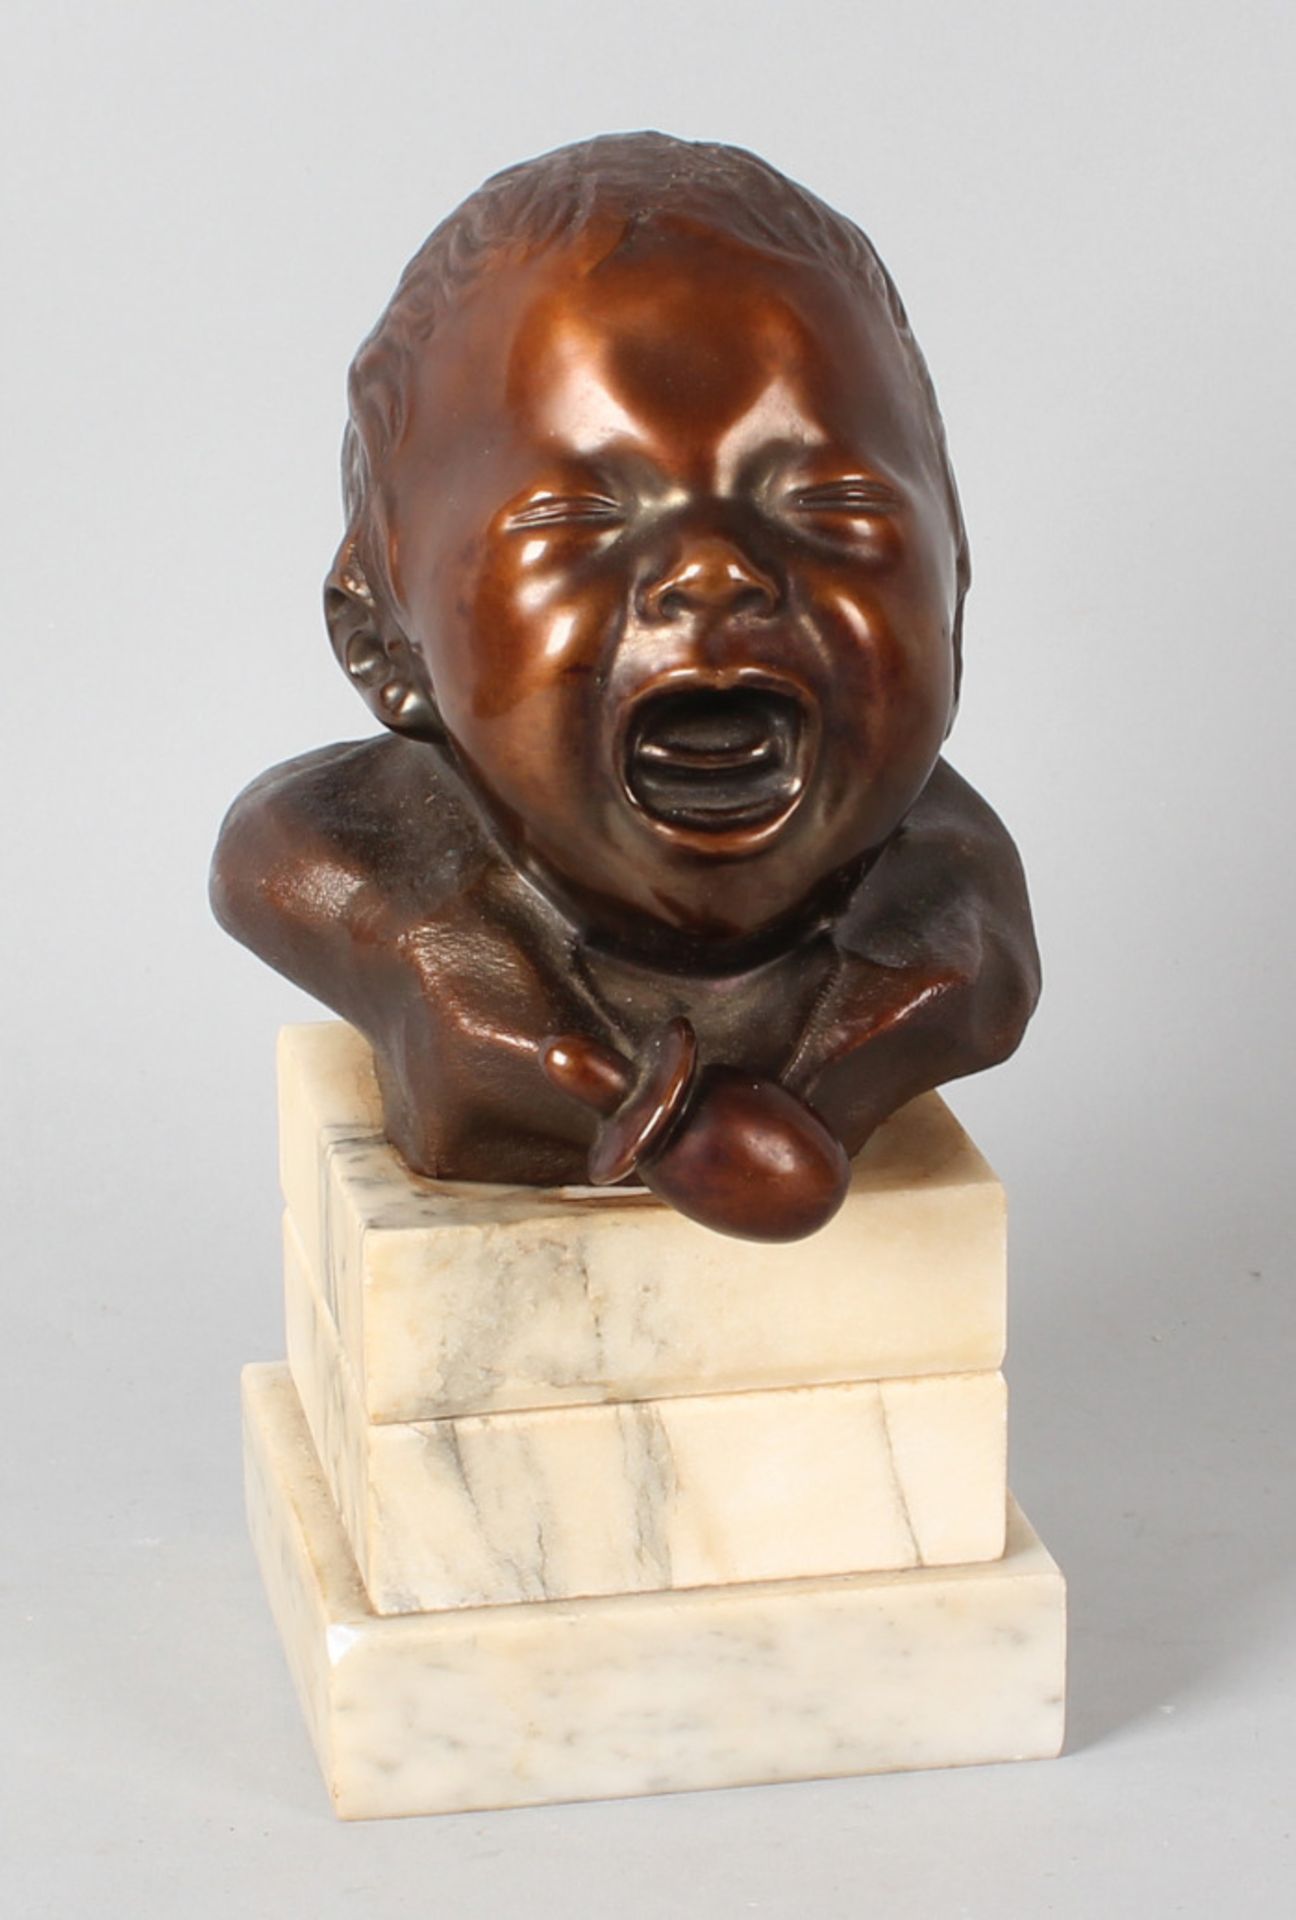 Art Deco sculpture around 1930 depicting a crying baby bust on marble base (metal composition)